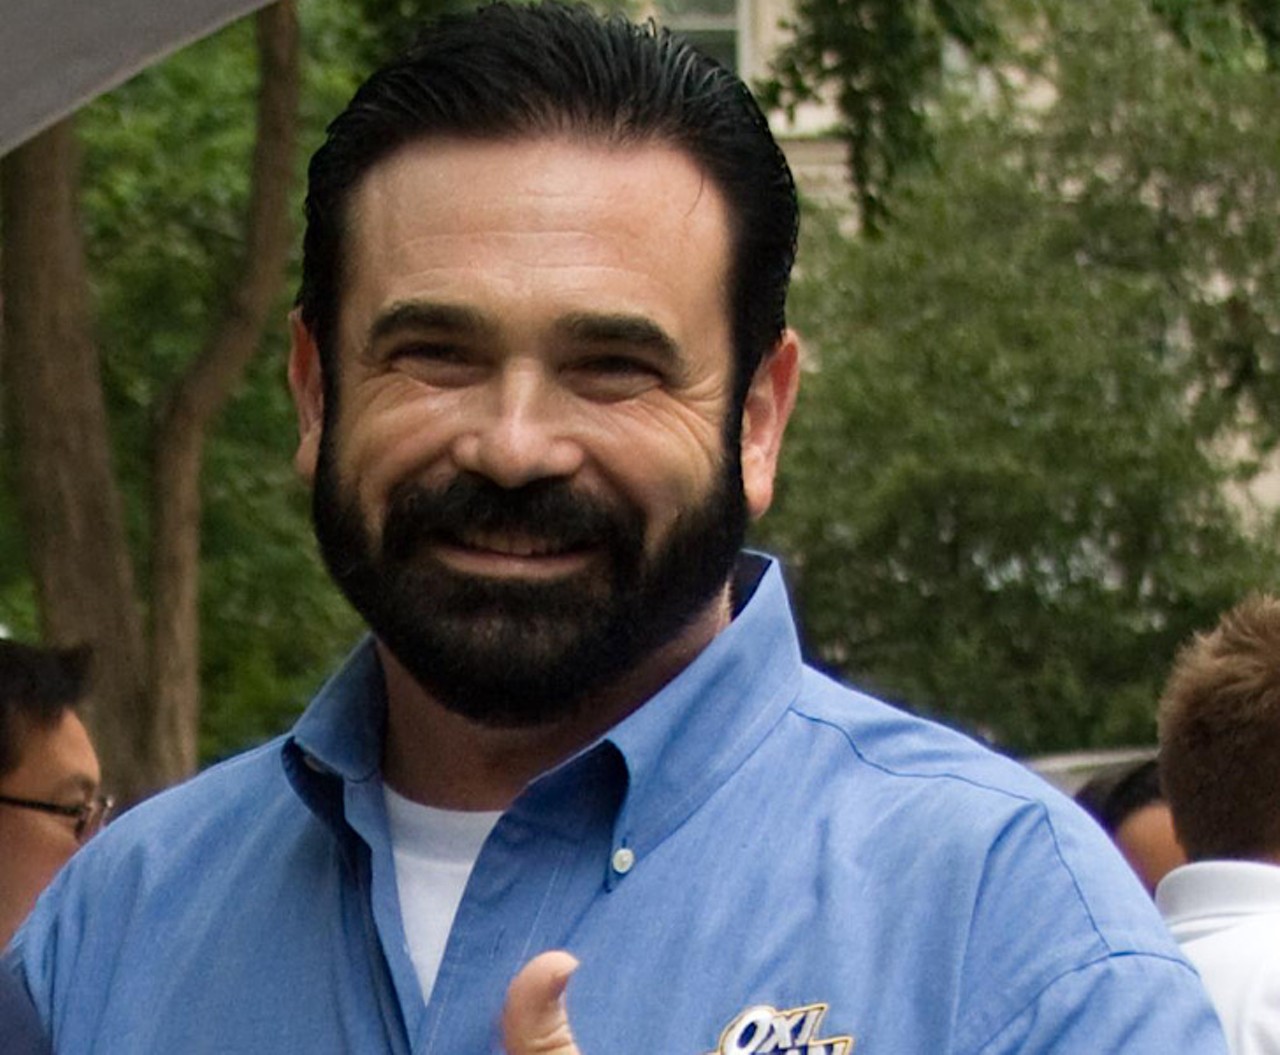 Billy Mays
Remember that guy from all those OxiClean commercials? Yeah, Billy Mays actually passed away in Tampa from heart disease. There were complications in the autopsy though, as the medical examiner determined that cocaine was a contributing factor to Mays&#146; death. Mays&#146; family disputes this claim, and criticized the medical examiner for revealing the information. 
Photo by Sharese Ann Frederick via Wikimedia Commons